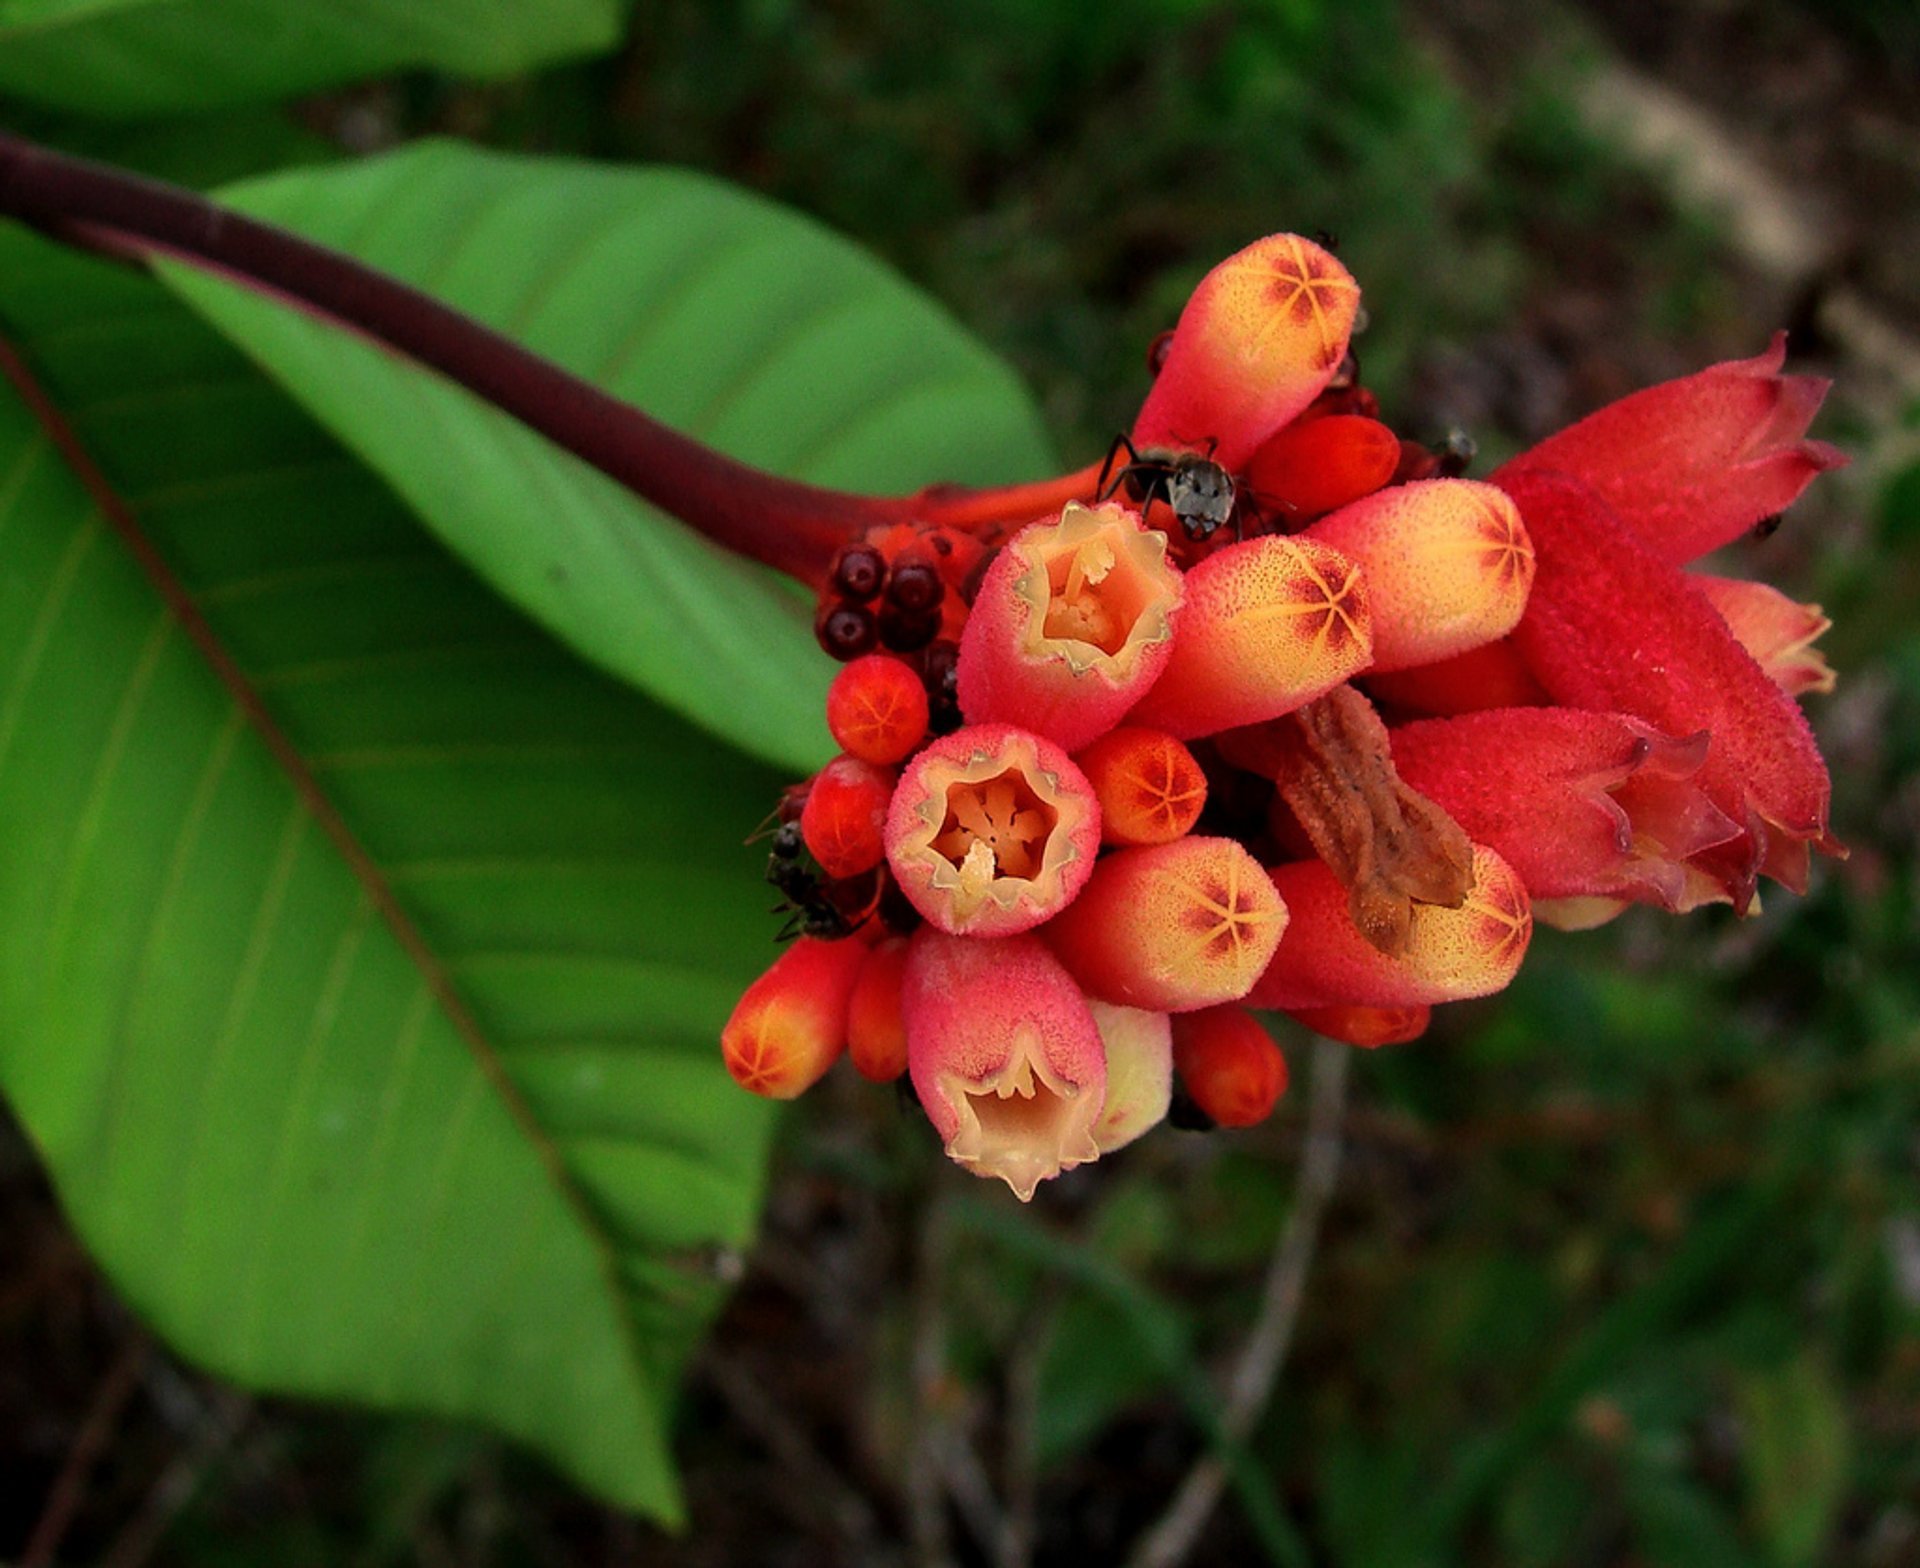 Fruiting and Flowering in the Amazon Rainforest